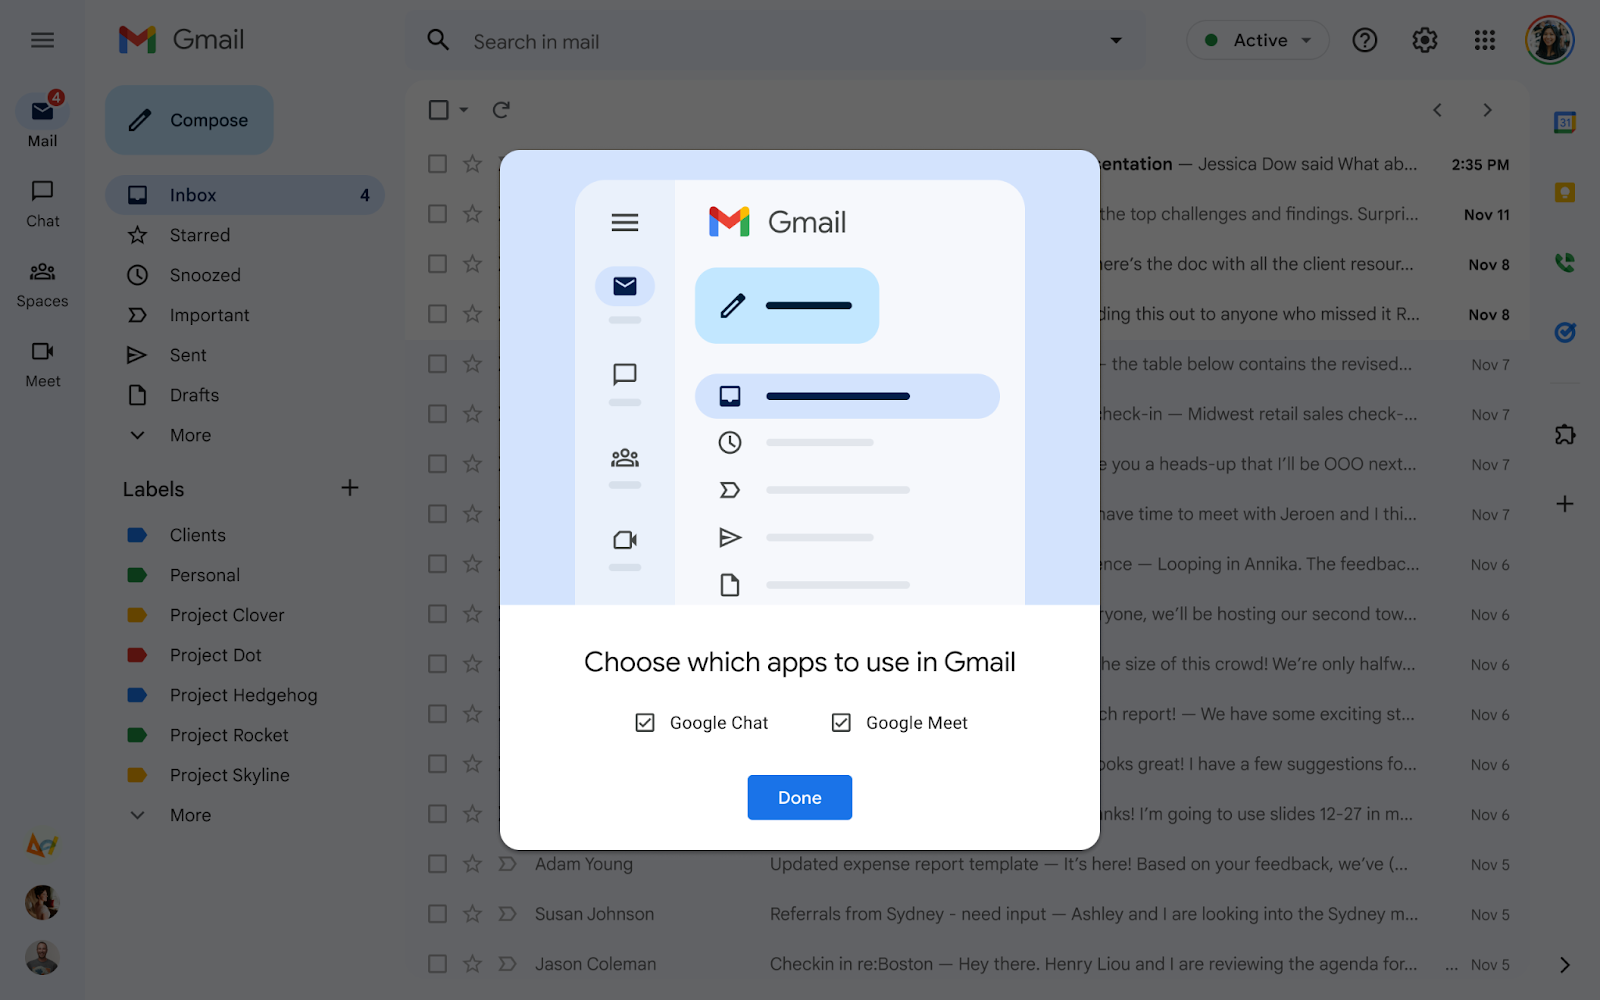 Choose the apps you want to use in Gmail